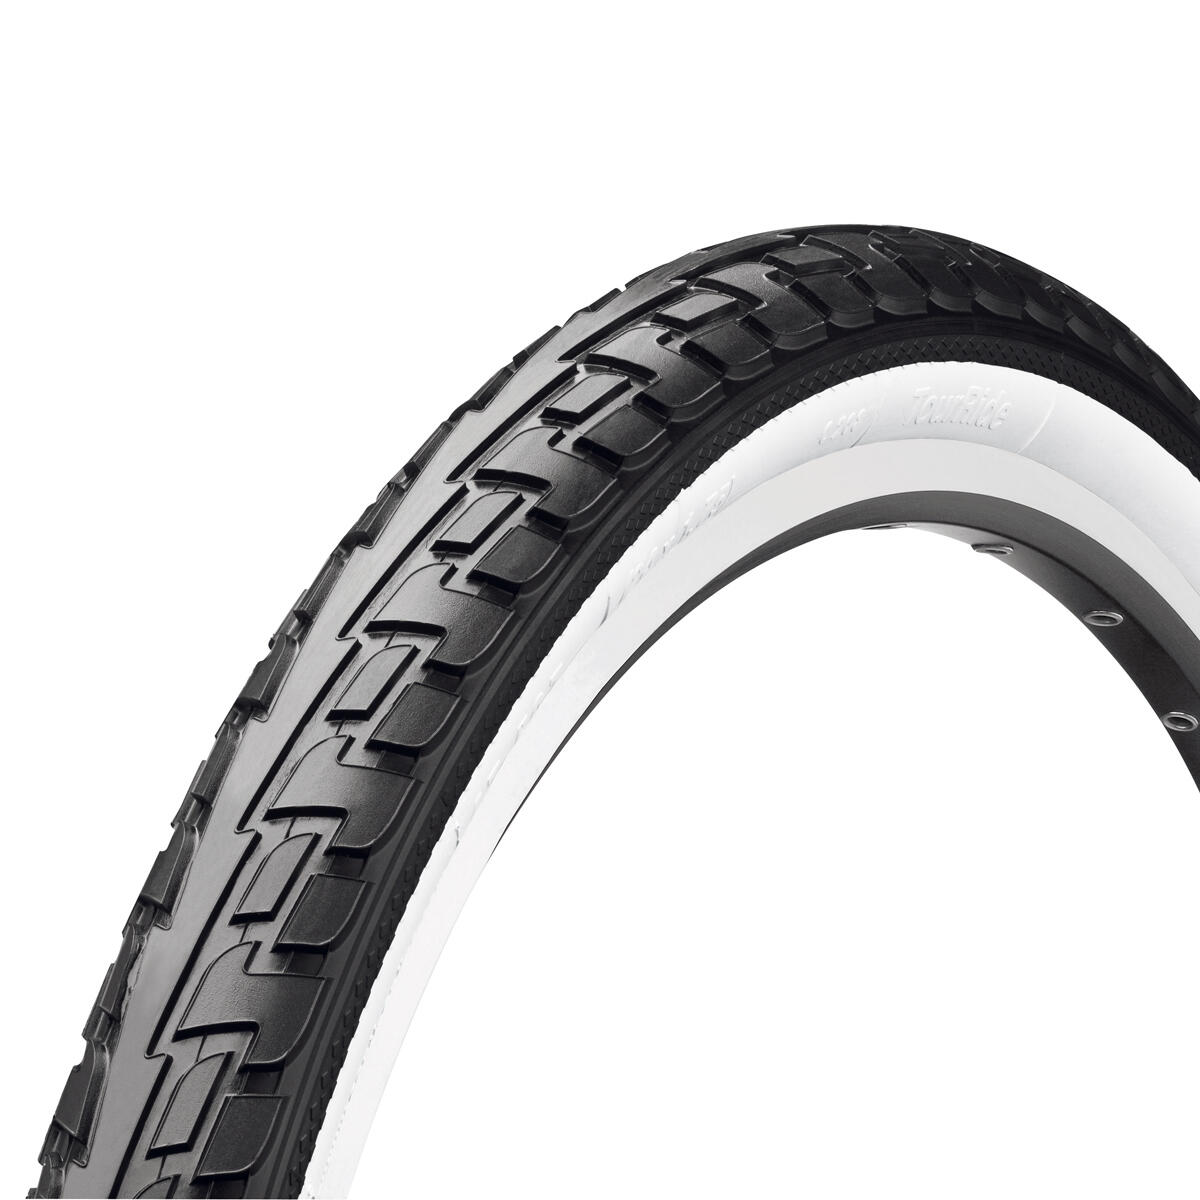 RIDE Tour Tyre-Wire Bead Urban Black/Black 700 X 32C Puncture Protection 5/5